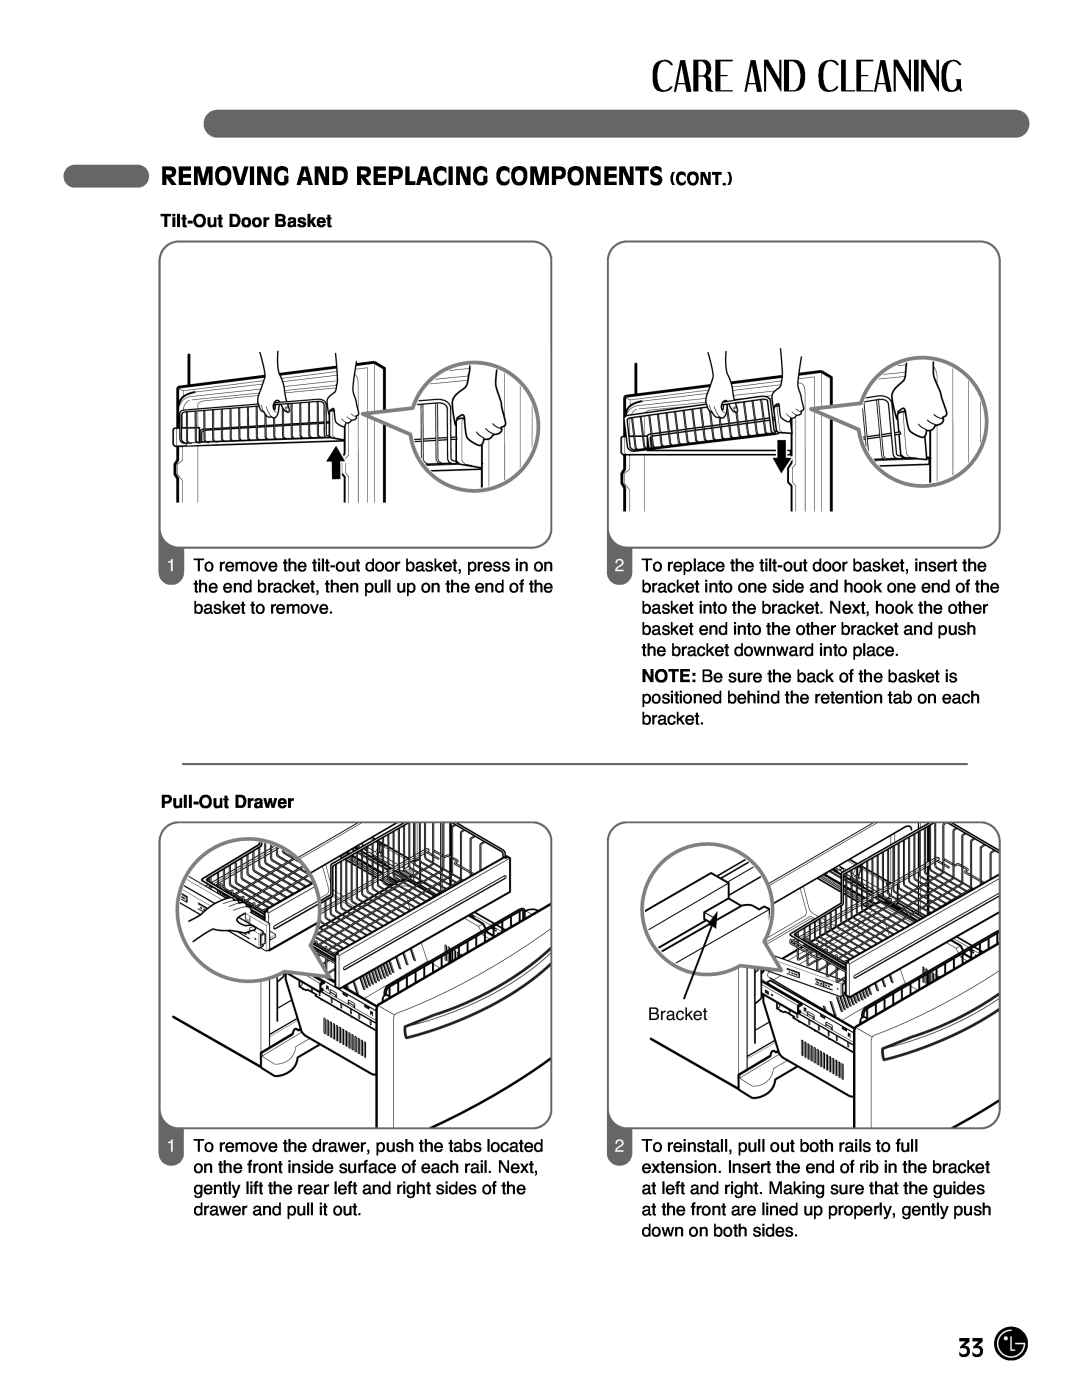 LG Electronics LFX25971**, LFX21971** manual Removing And Replacing Components Cont, Tilt-Out Door Basket, Pull-Out Drawer 